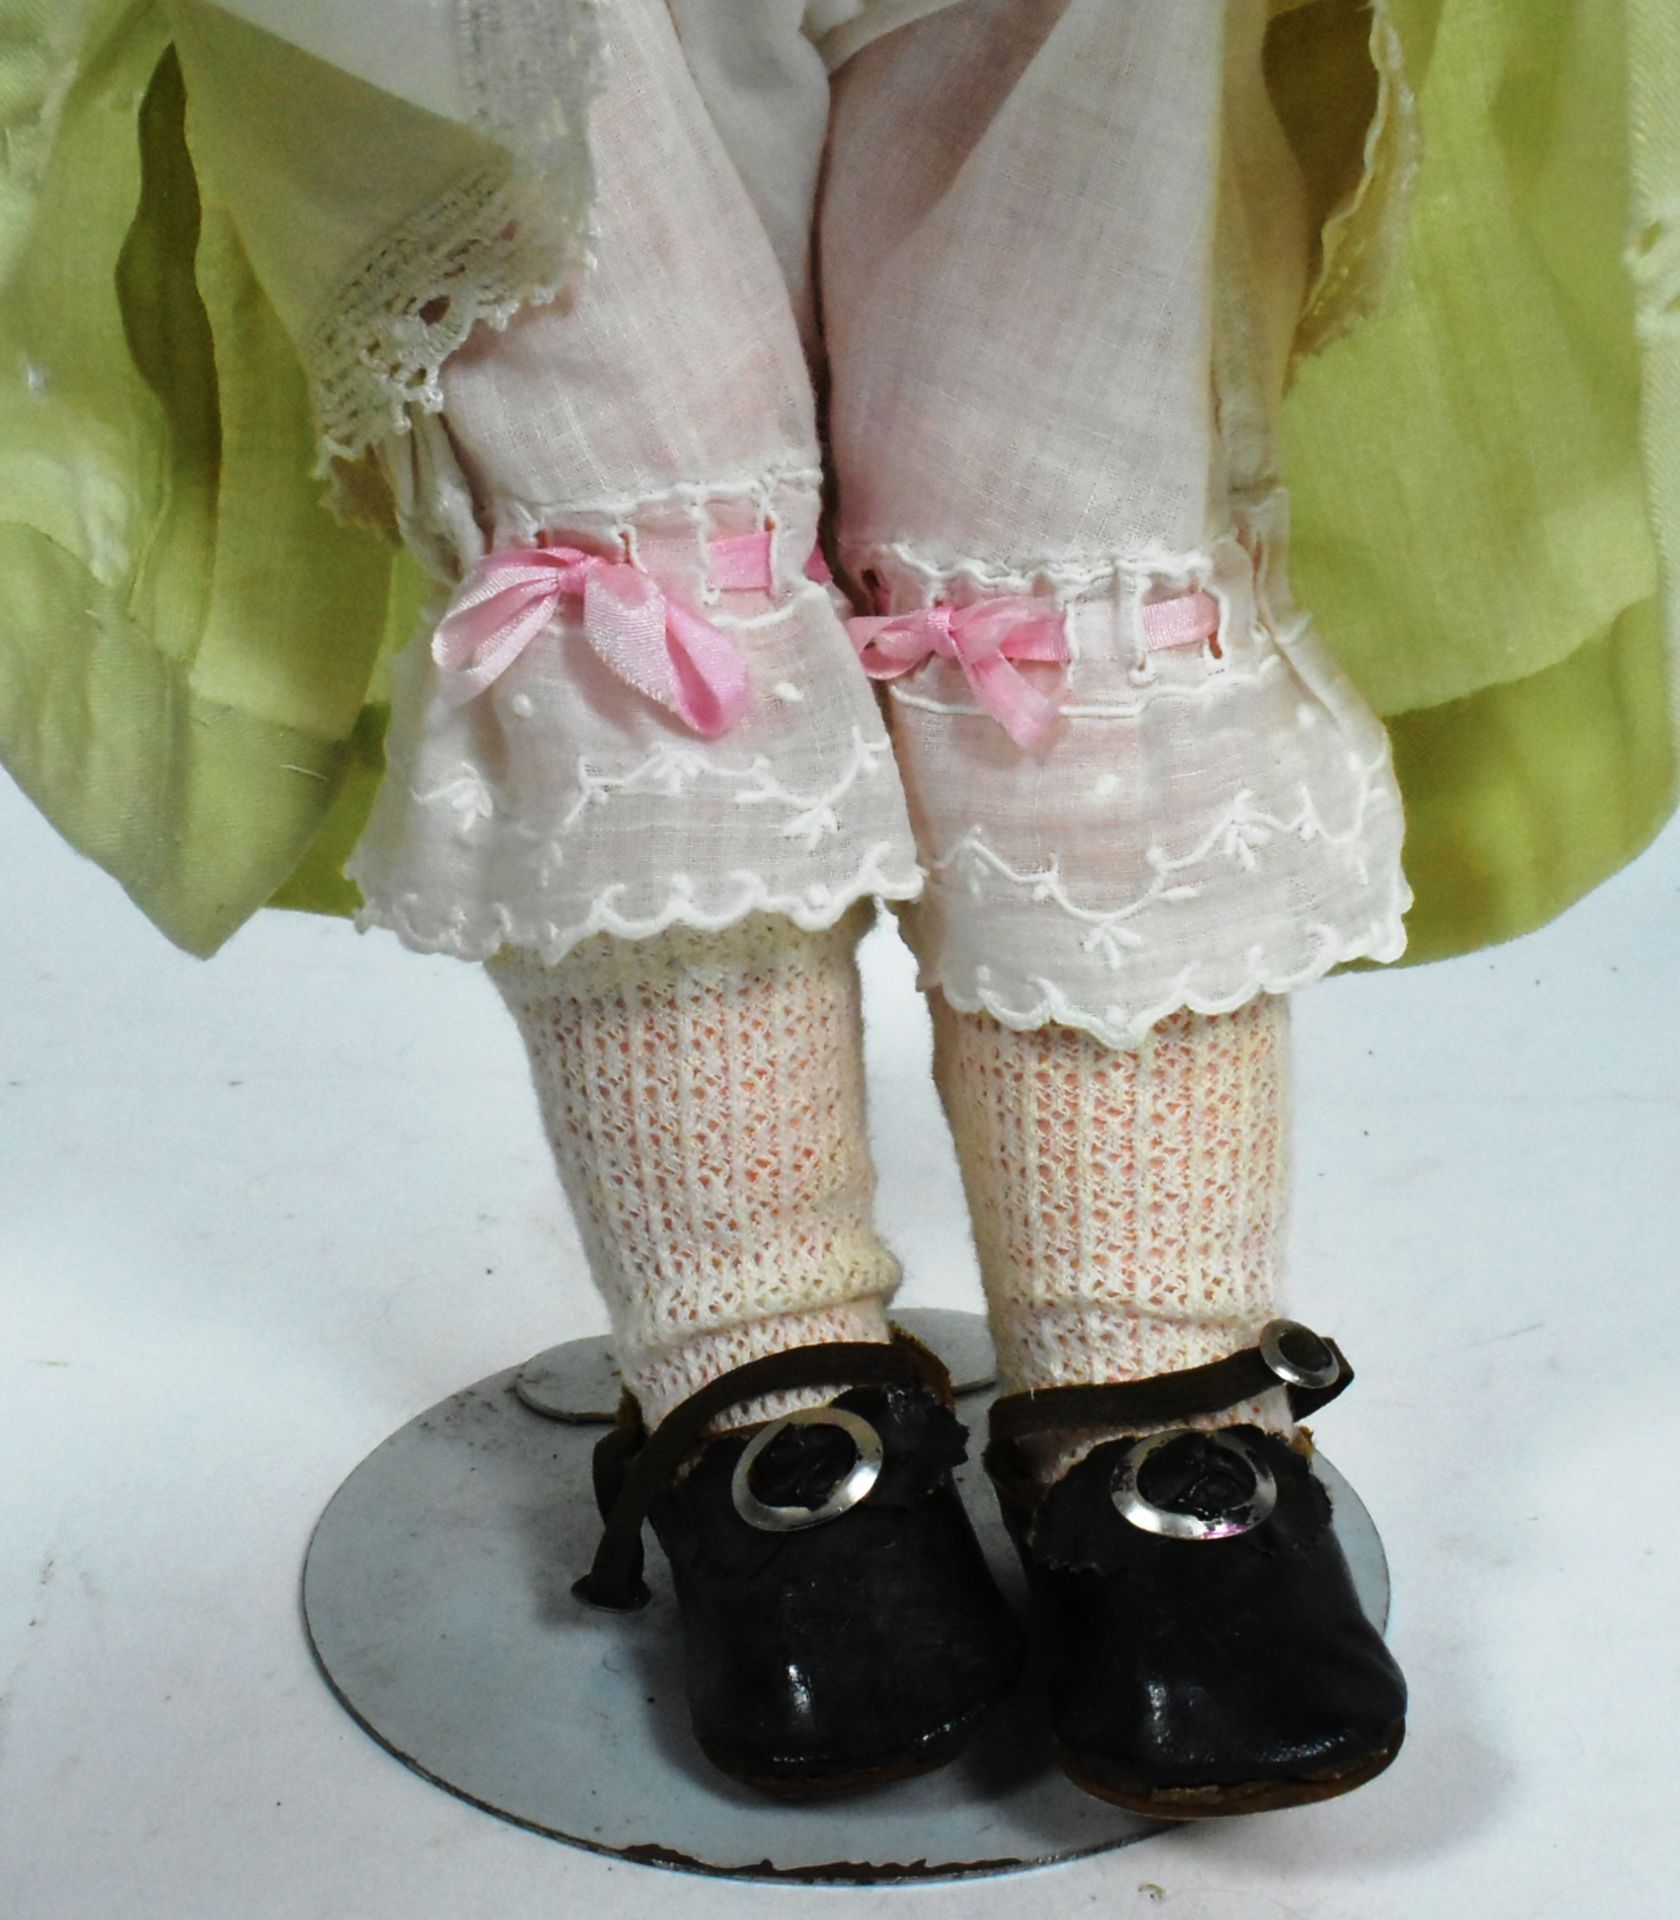 KESTNER - ANTIQUE LATE 19TH CENTURY BISQUE HEADED DOLL - Image 6 of 6